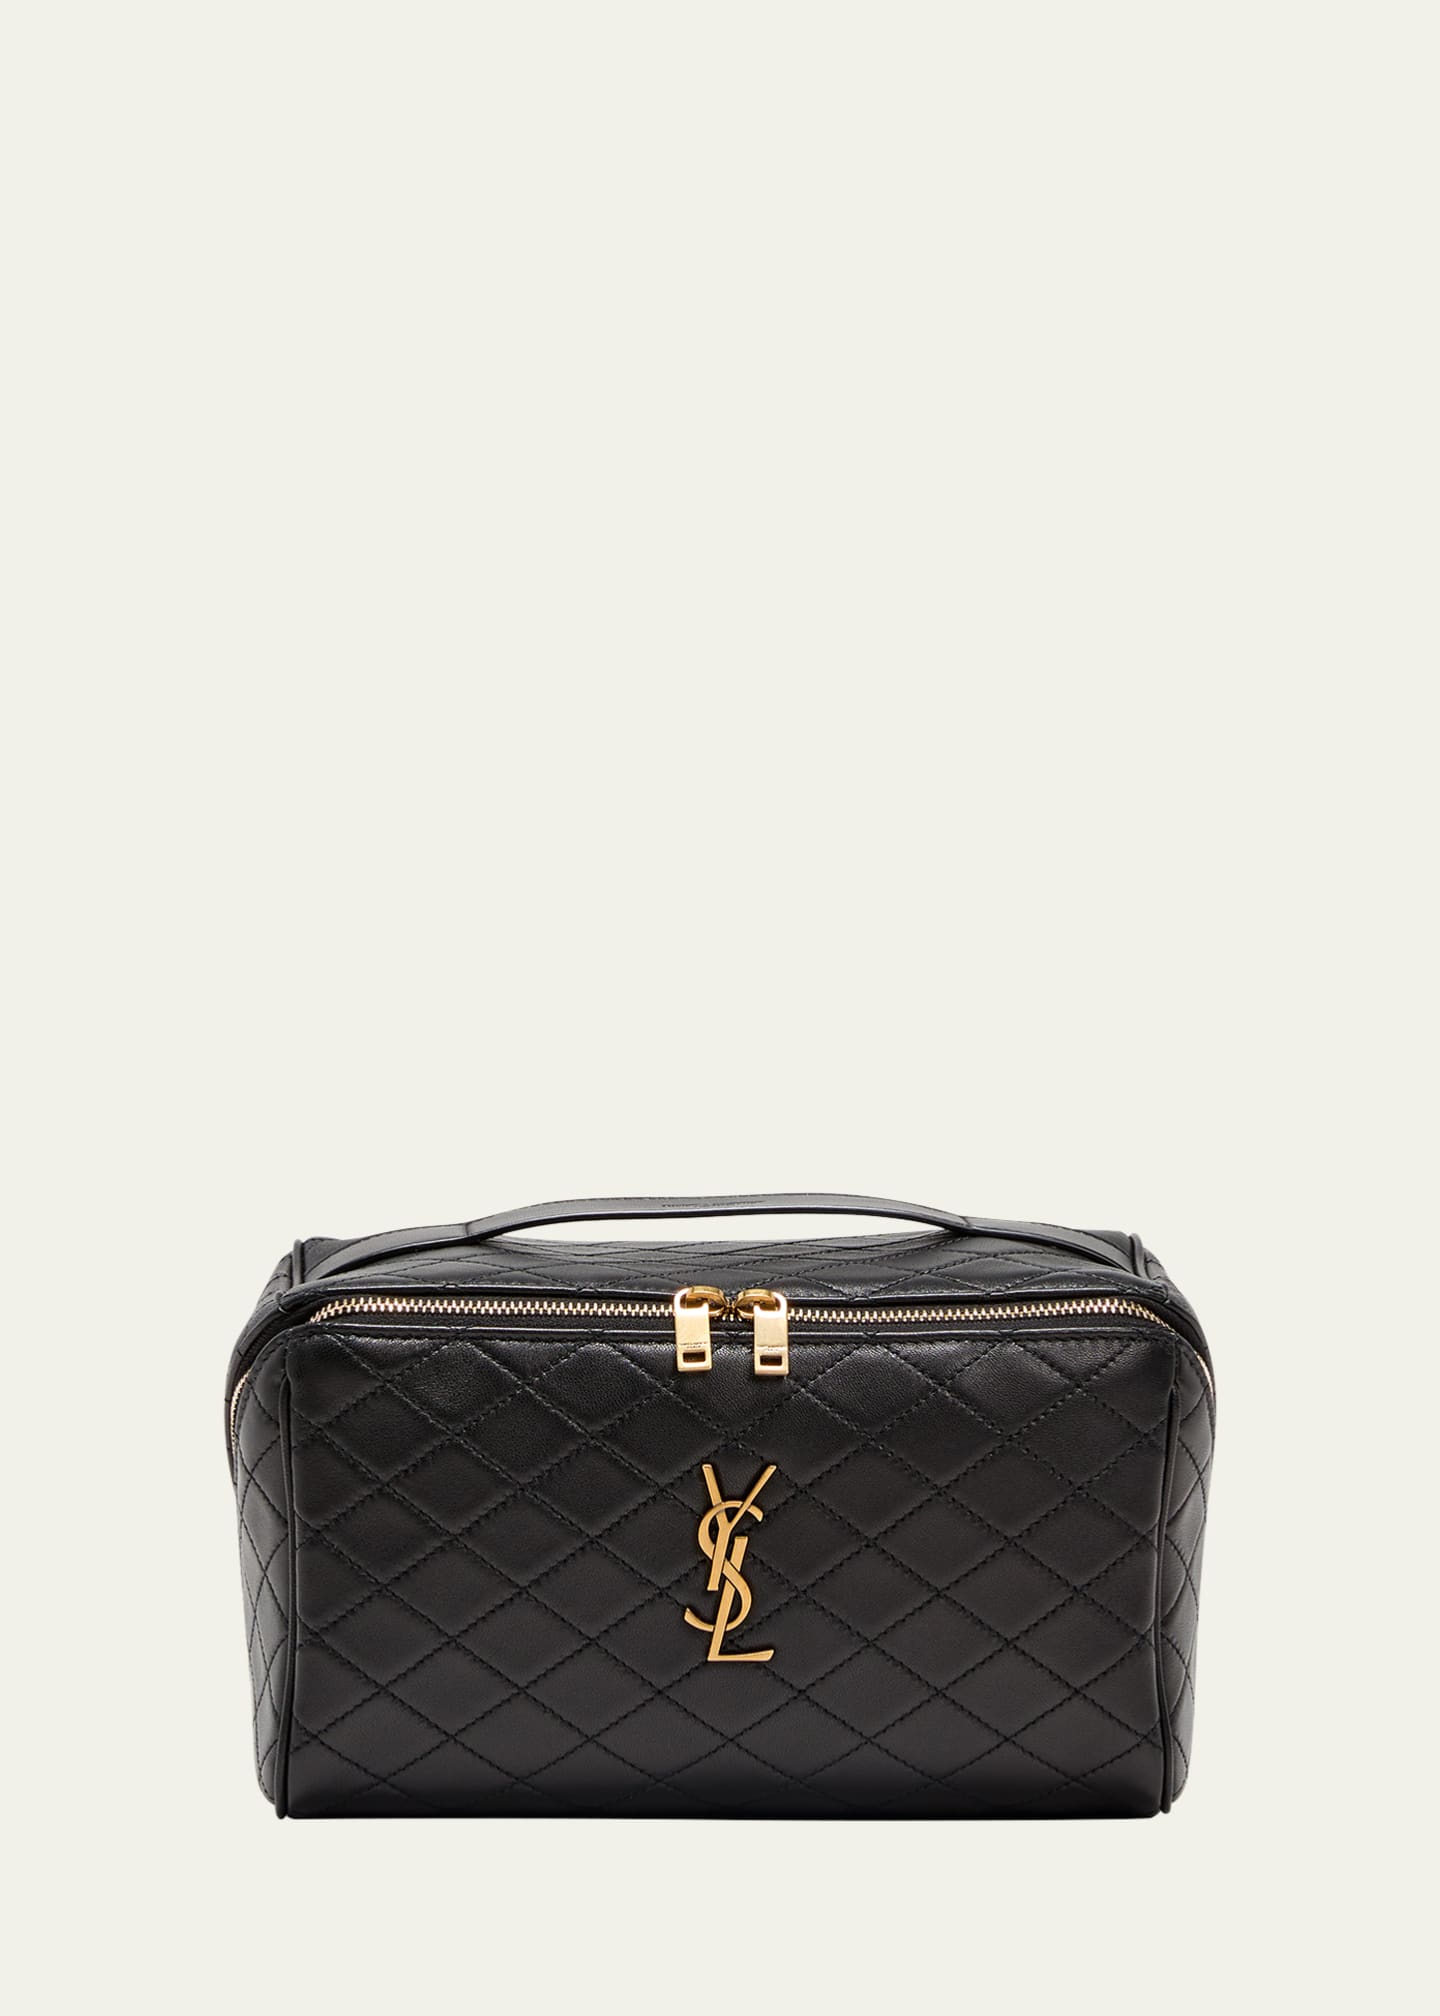 Saint Laurent YSL Quilted Leather Vanity Case